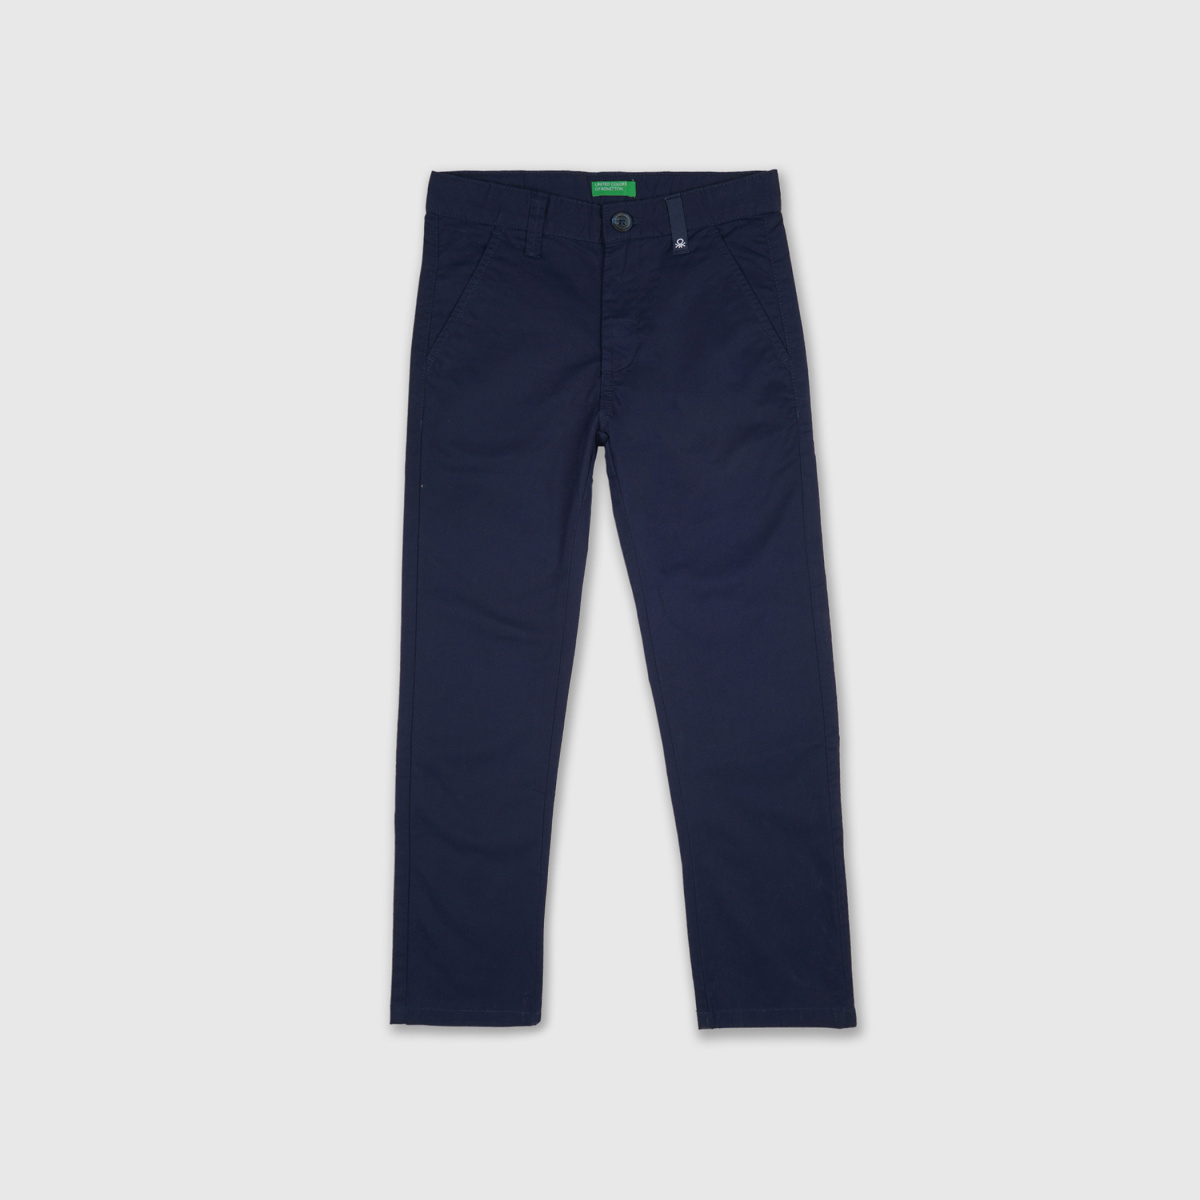 UNITED COLORS OF BENETTON Boys Solid Casual Pants